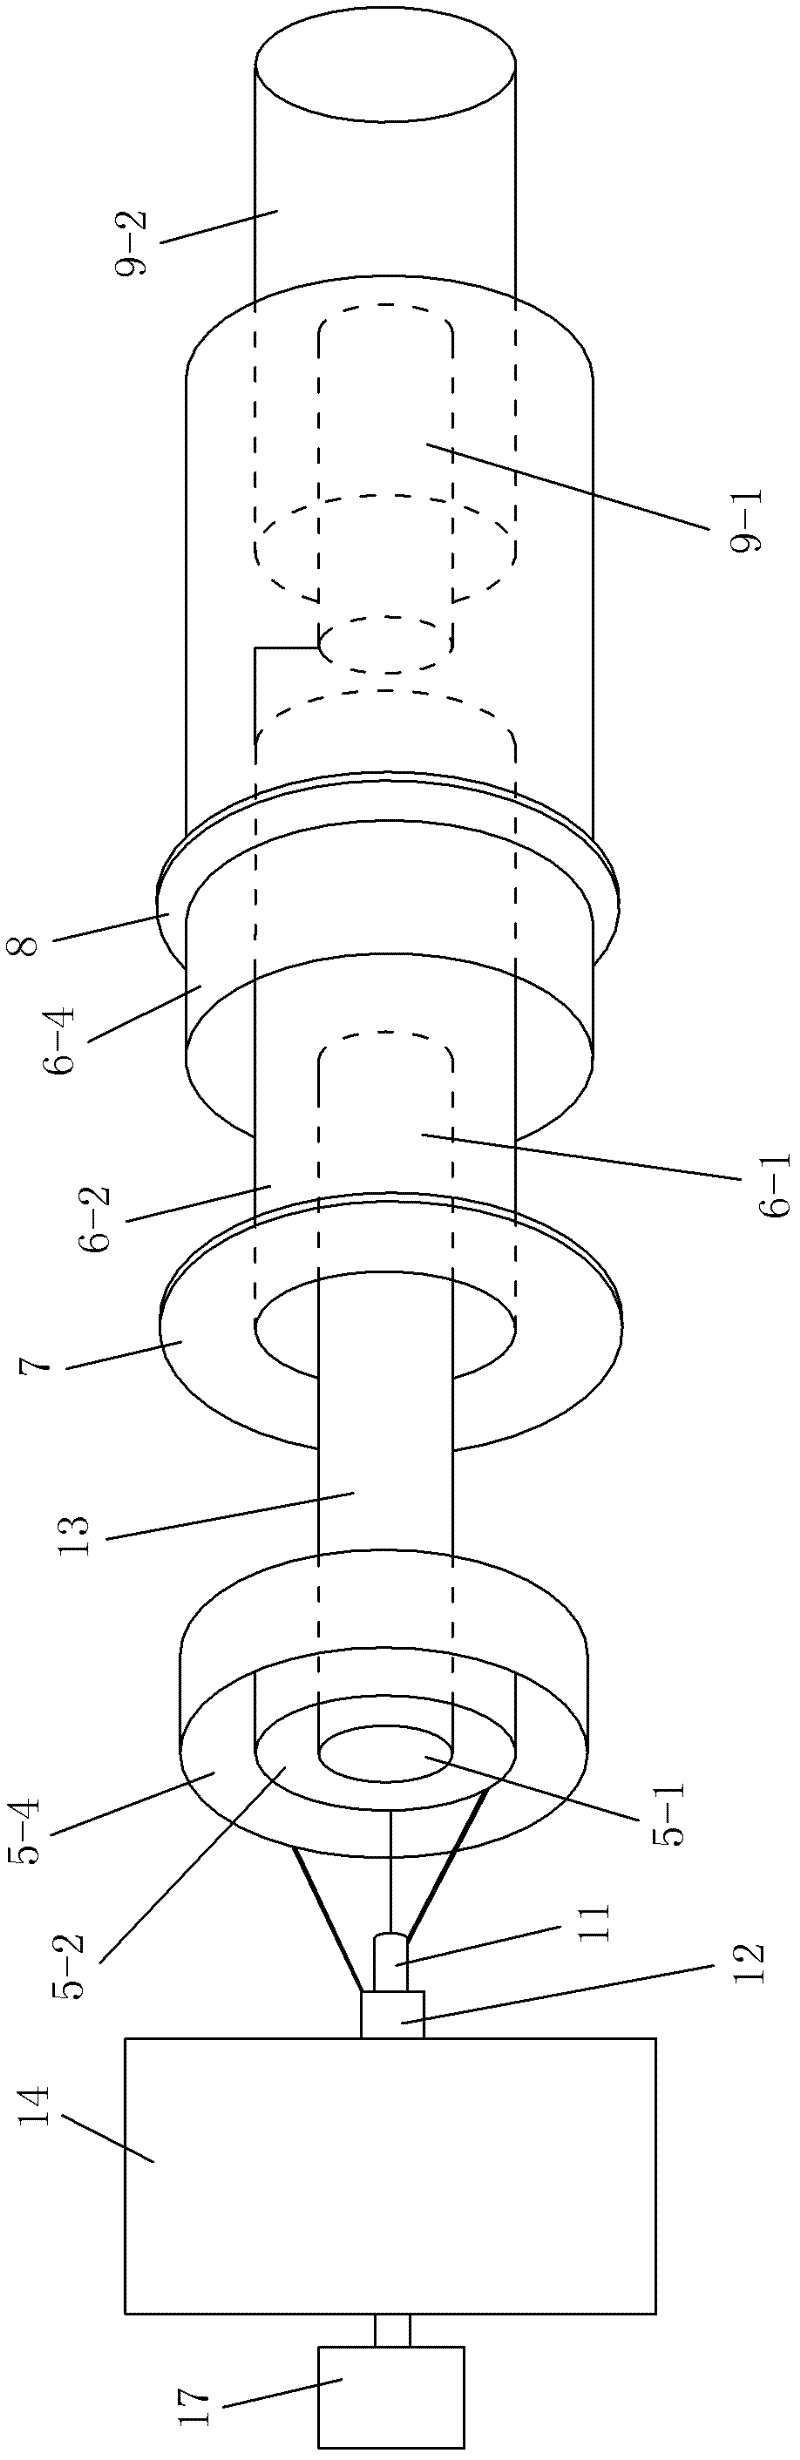 Automobile continuously variable transmission (CVT) system, and design and control methods thereof